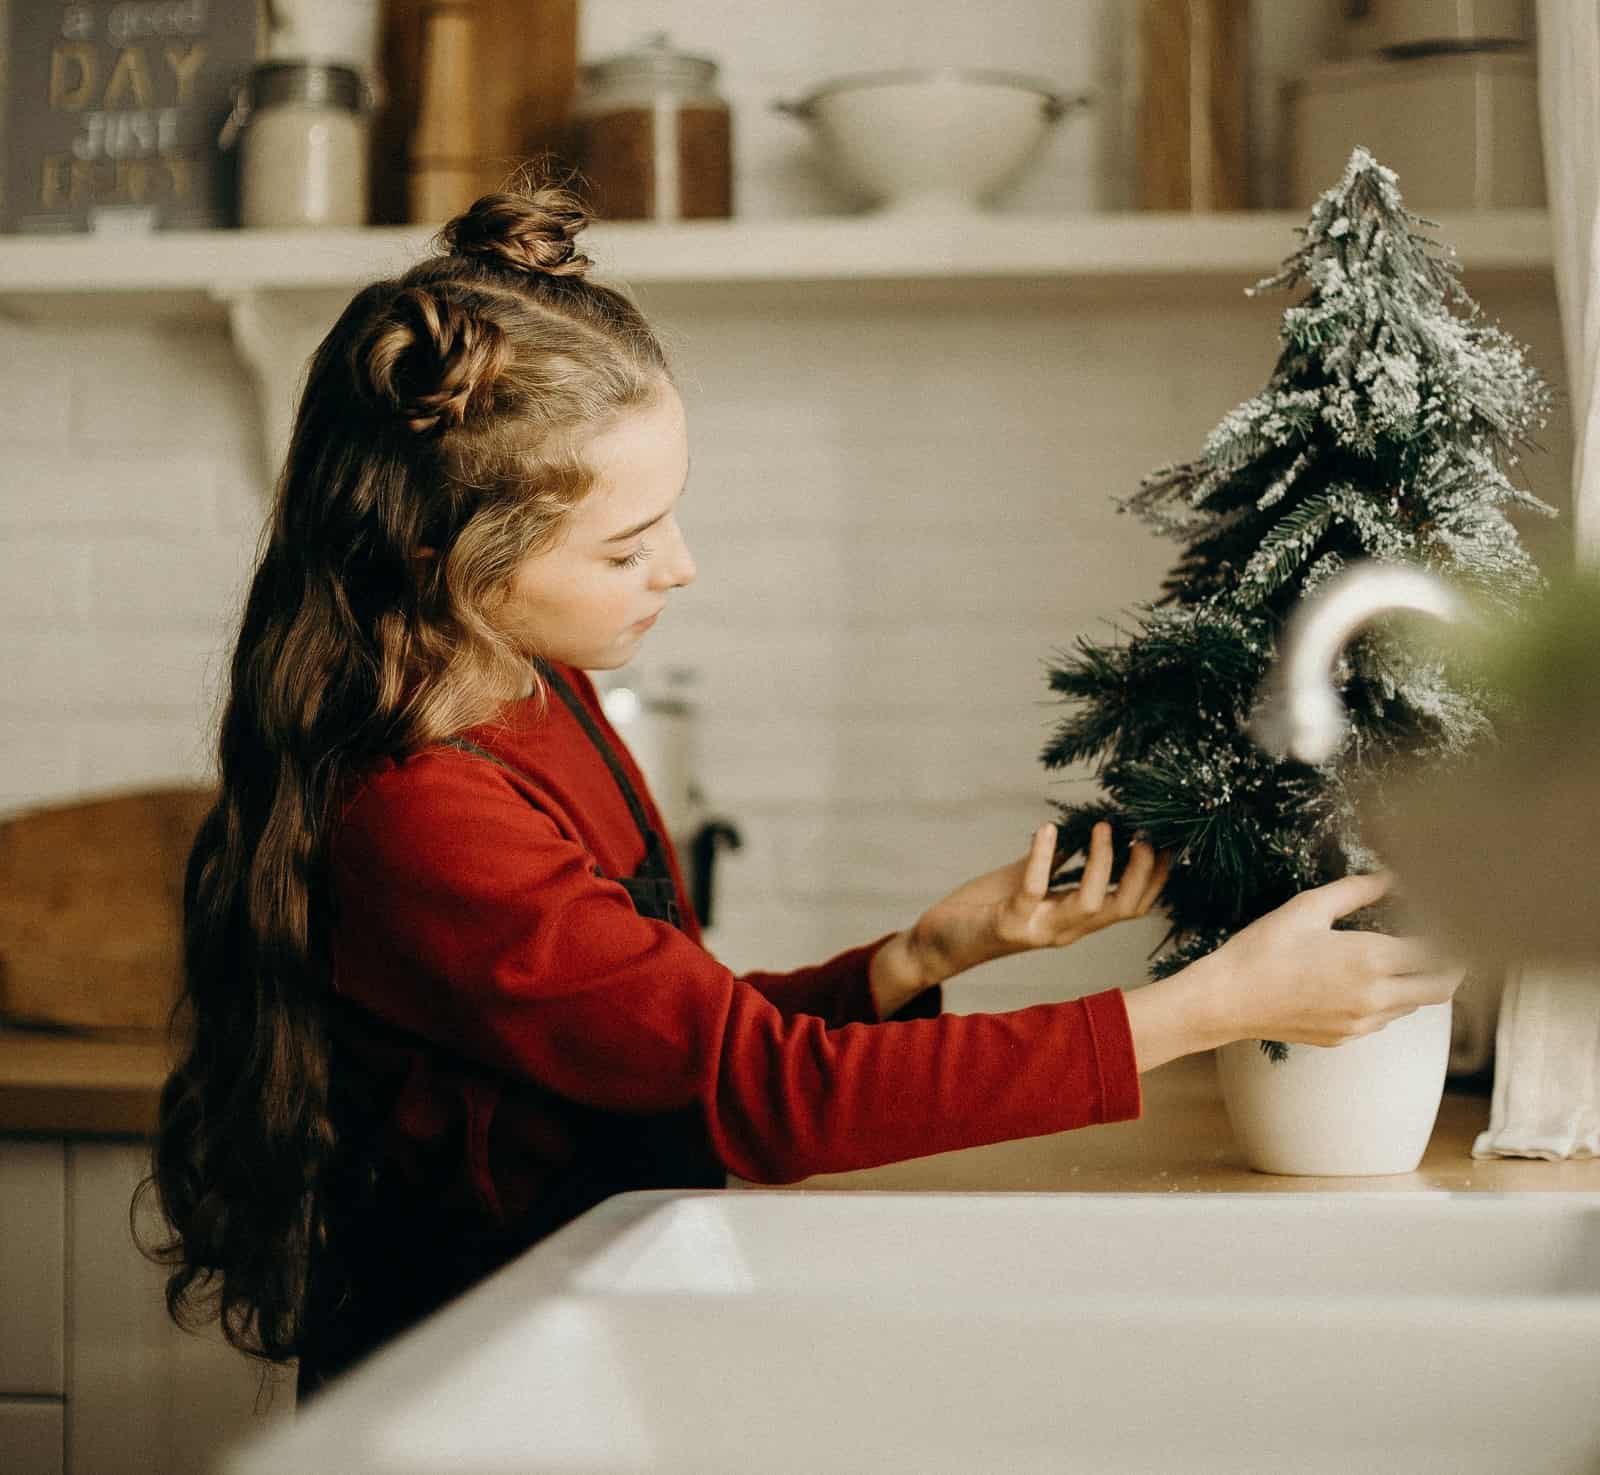 How do you motivate children to do holiday chores and what tasks can you assign to toddlers?